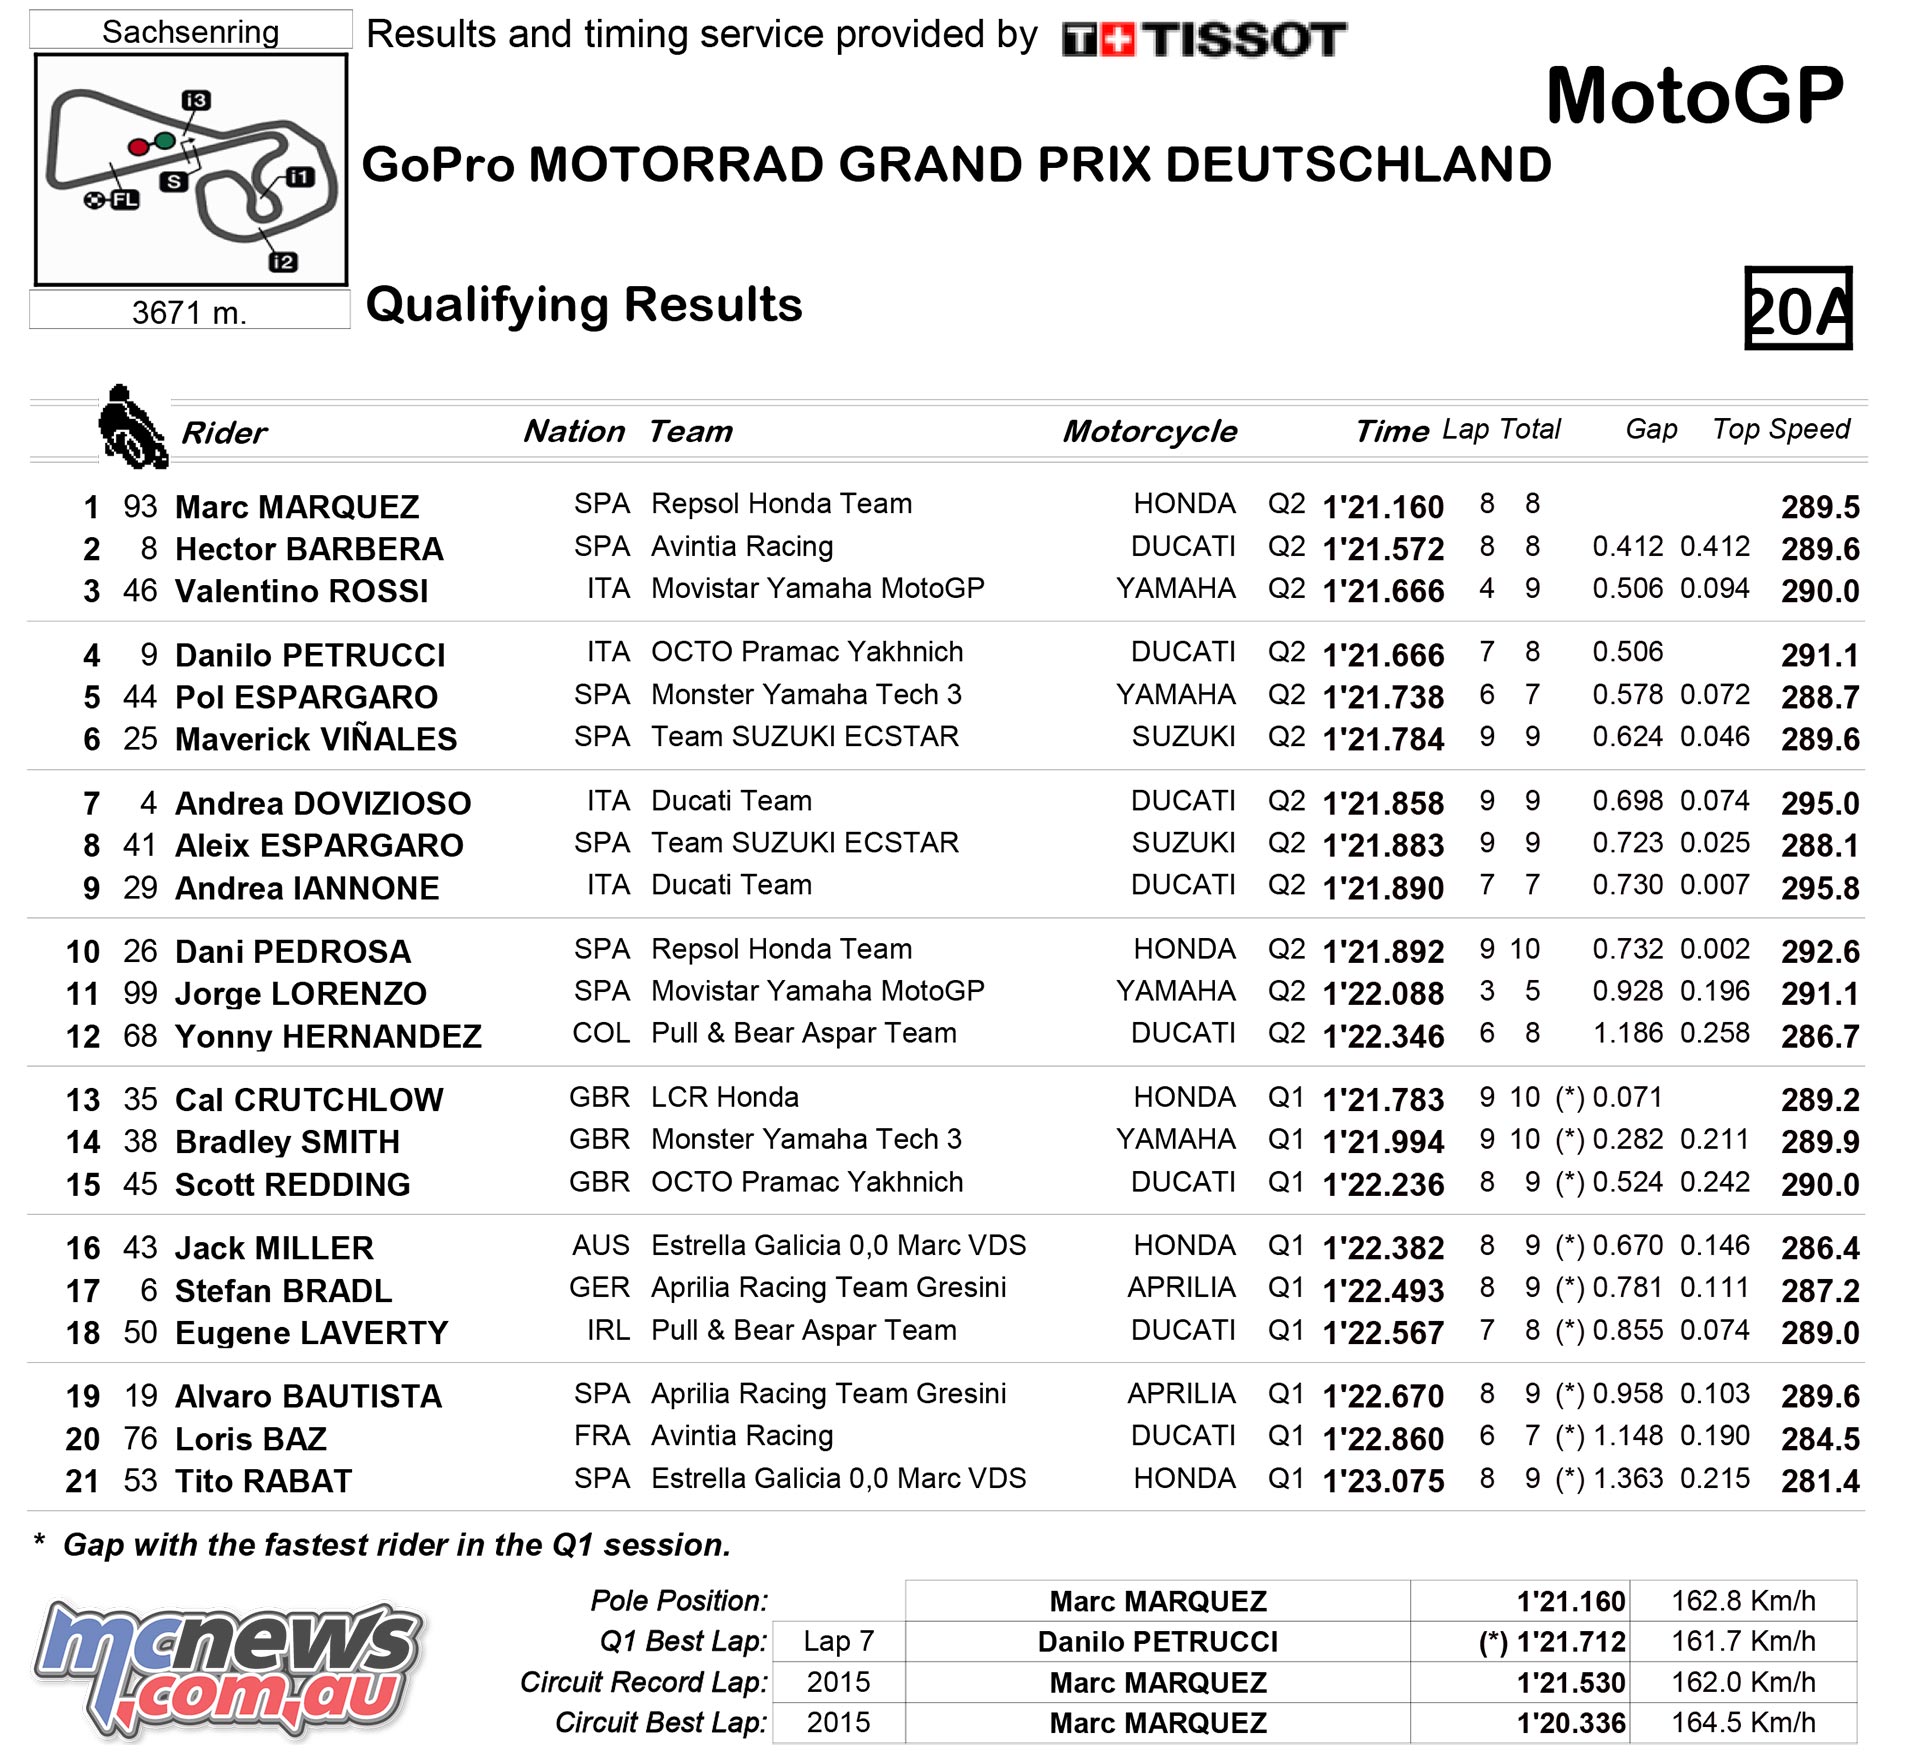 Motogp qualifying results today